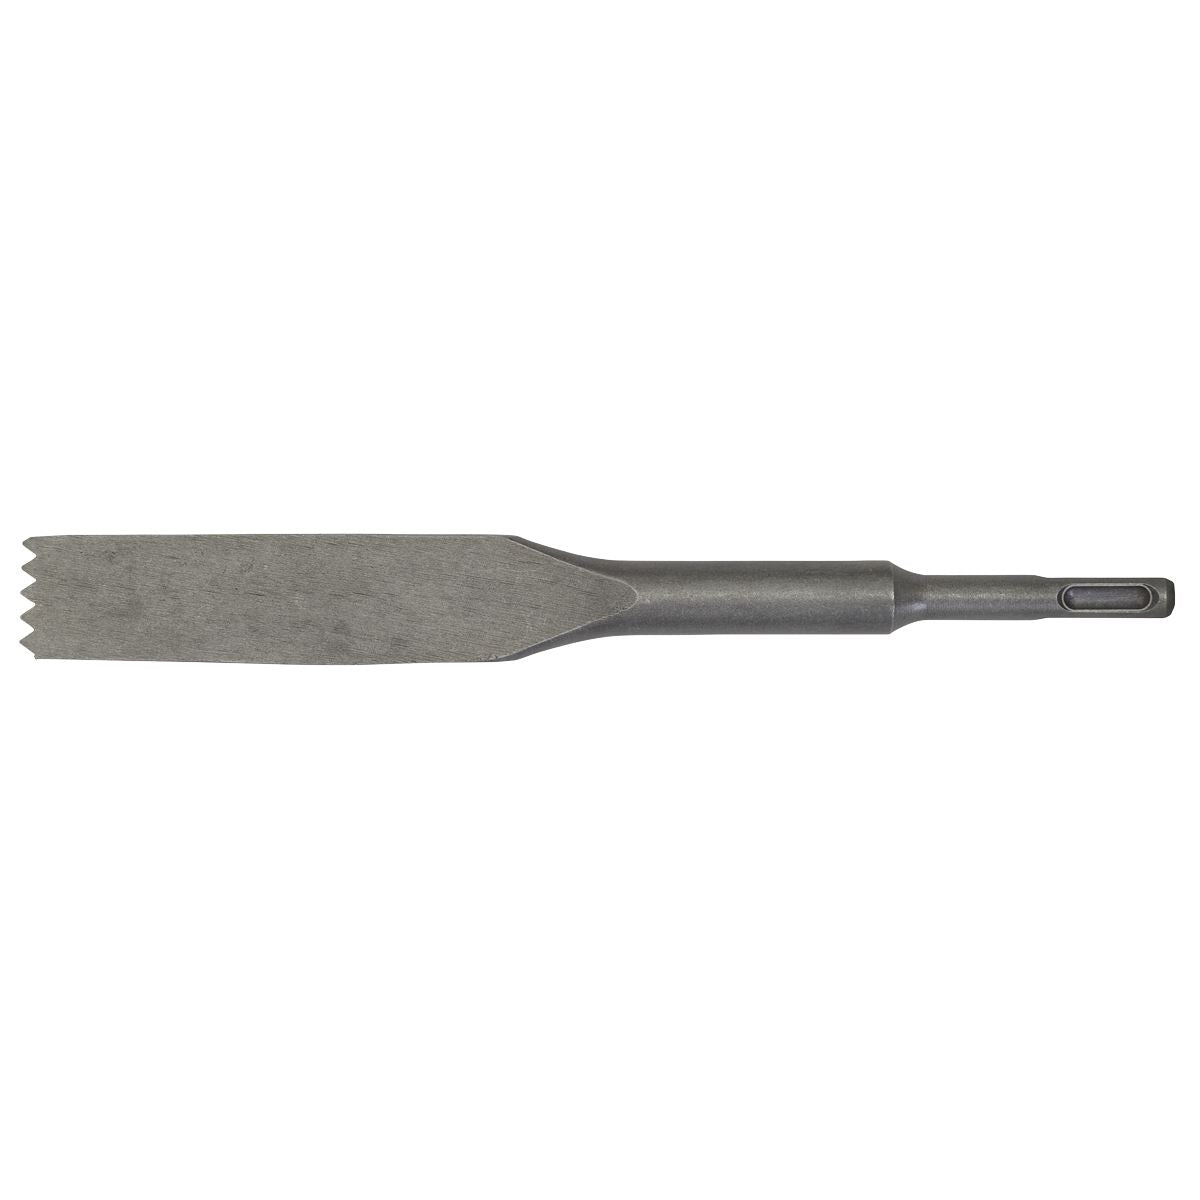 Sealey Toothed Mortar/Comb Chisel 30 x 250mm - SDS Plus